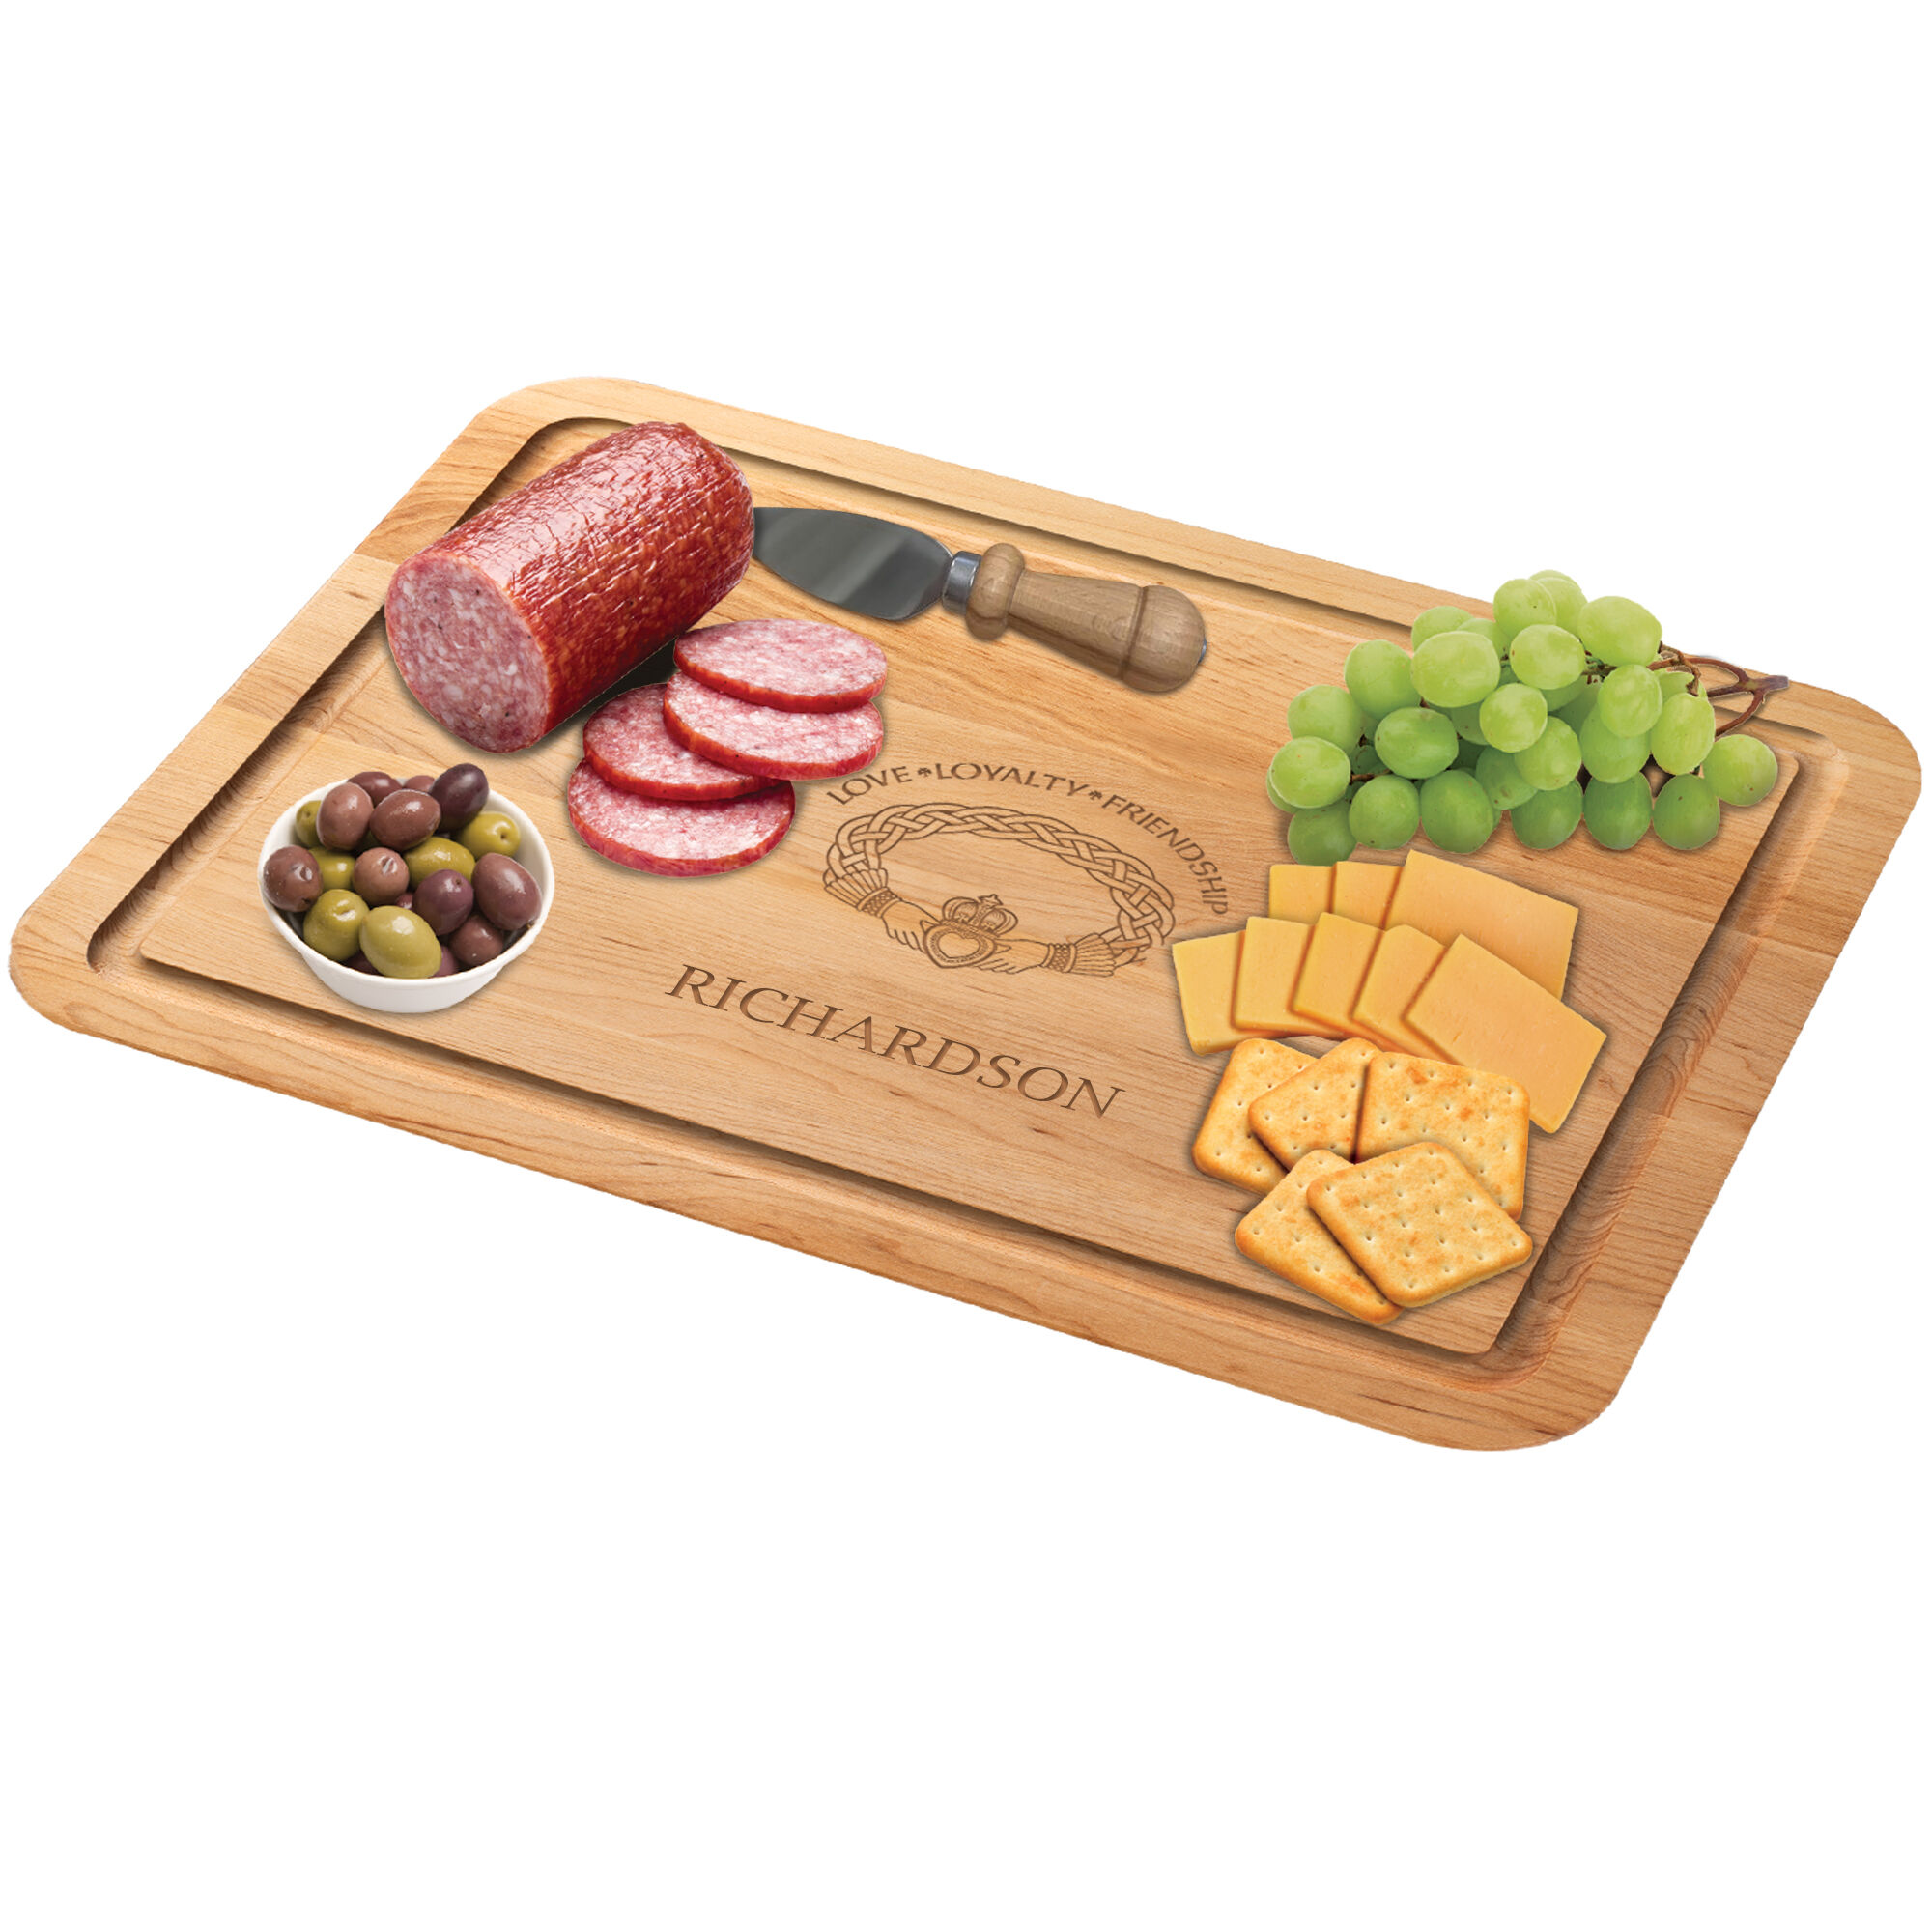 The Personalized Irish Blessing Cutting Board Free Knife 5108 0026 c meat with cheese